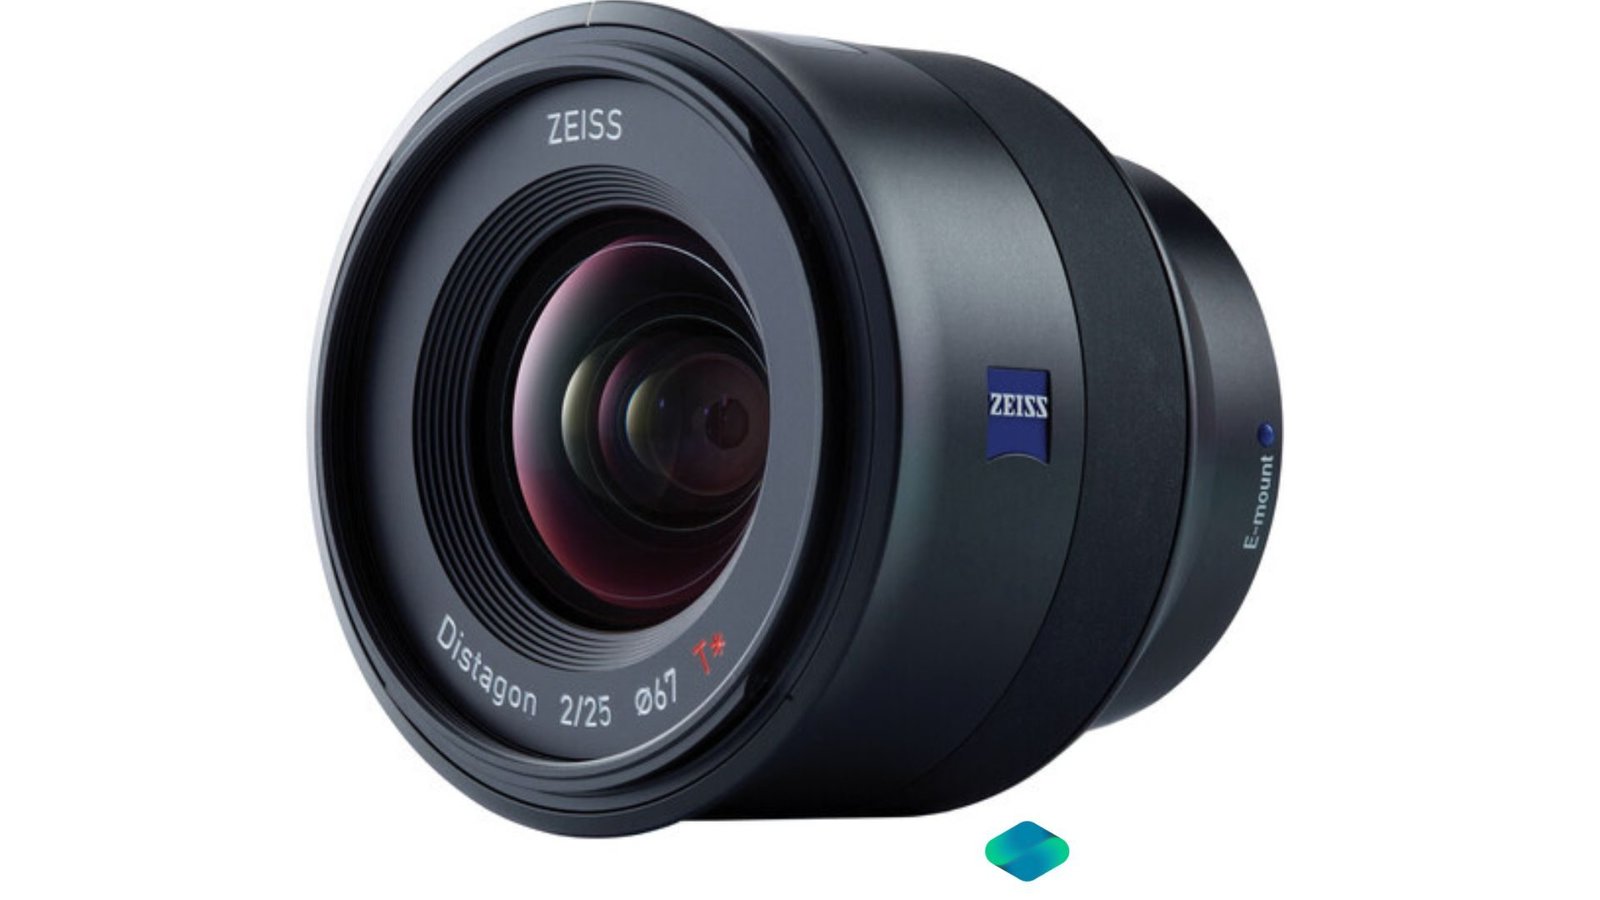 Rent ZEISS Batis Lens for Sony E Mount 2/25 in Delhi NCR, Camera, Camera lenses for rent, Camera accessories, in Delhi Gurgaon Noida, hire Shooting equipment, Lighting equipment rental, Film gear rental for Video production, camera rental company in Delhi, film equipment rental company